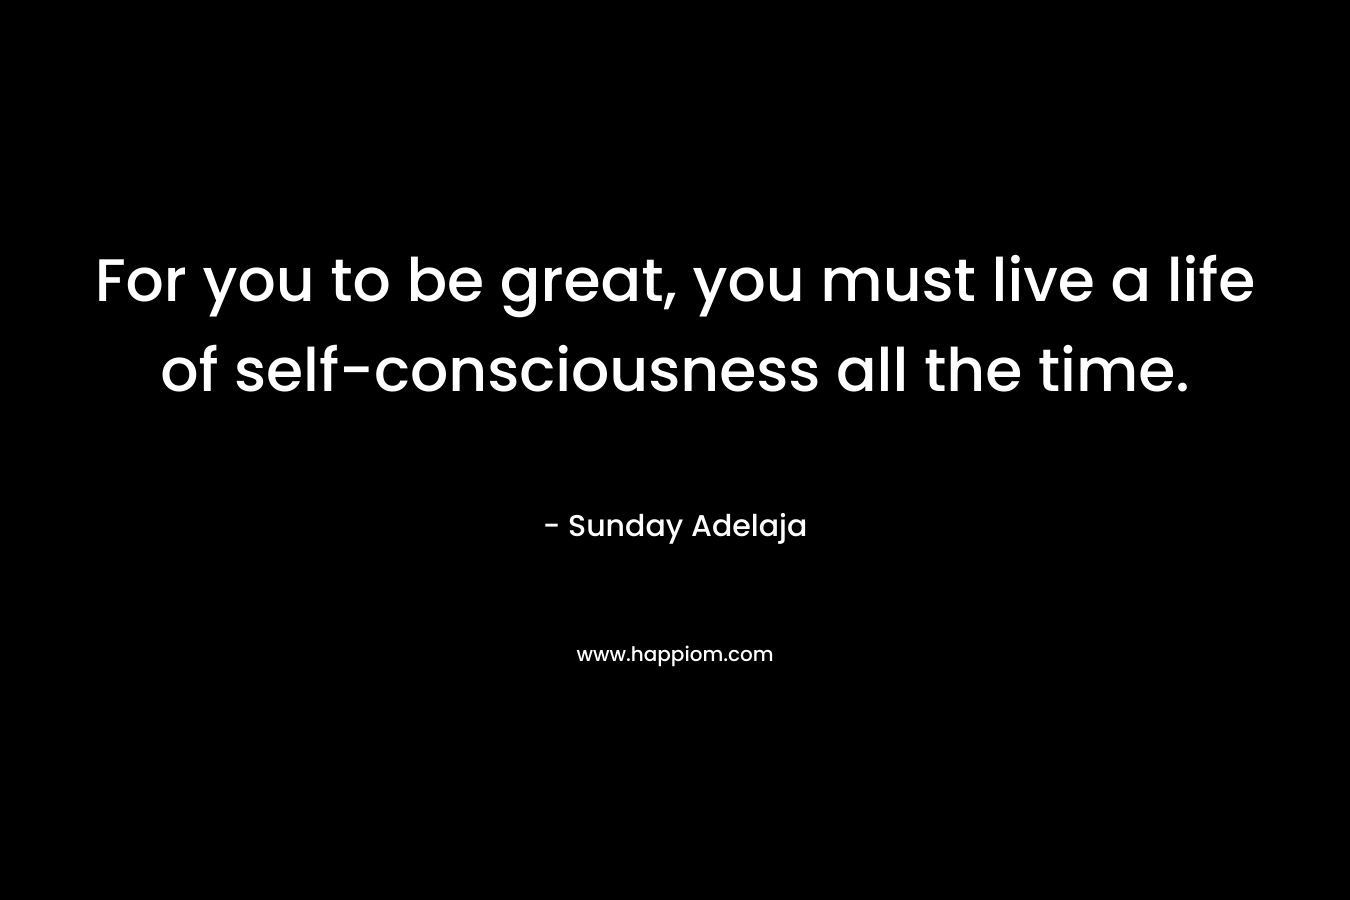 For you to be great, you must live a life of self-consciousness all the time.